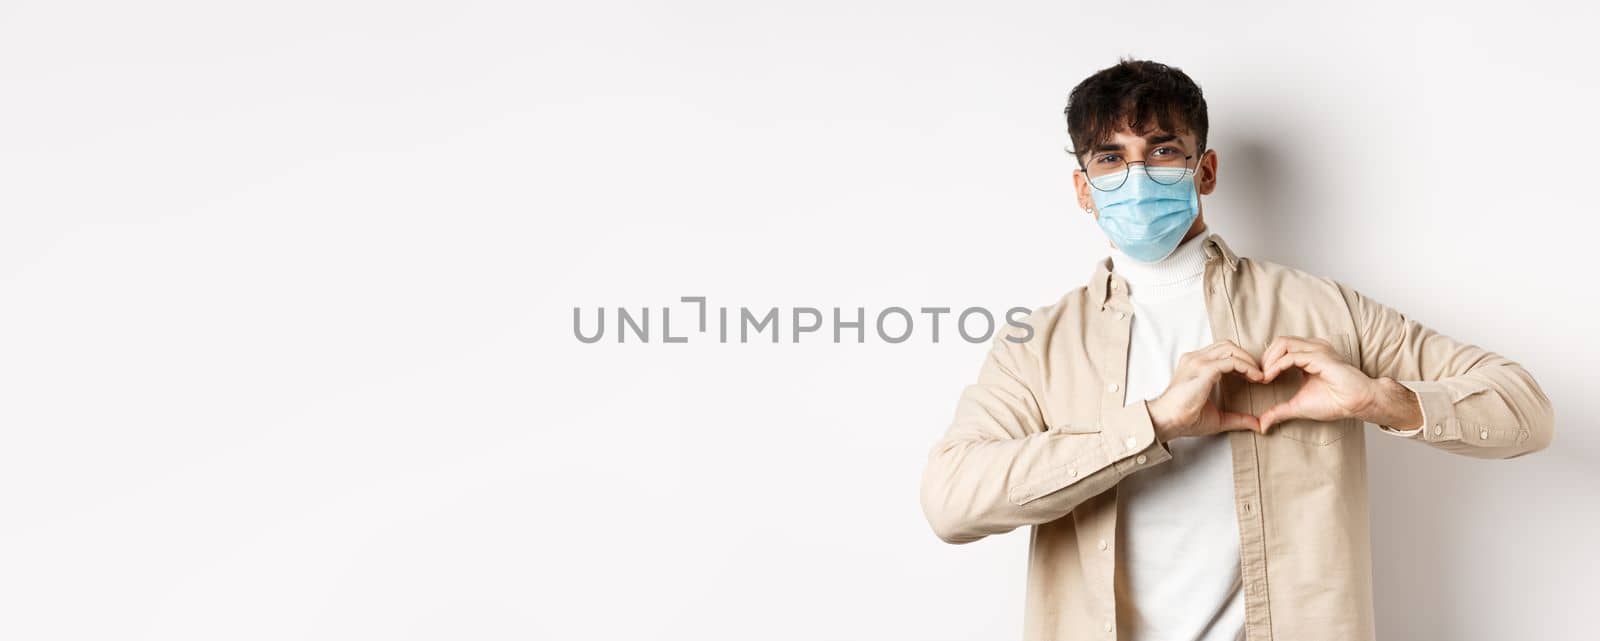 Health, covid and quarantine concept. Romantic young man in sterile medical mask showing heart gesture on chest, say I love you, standing on white background.